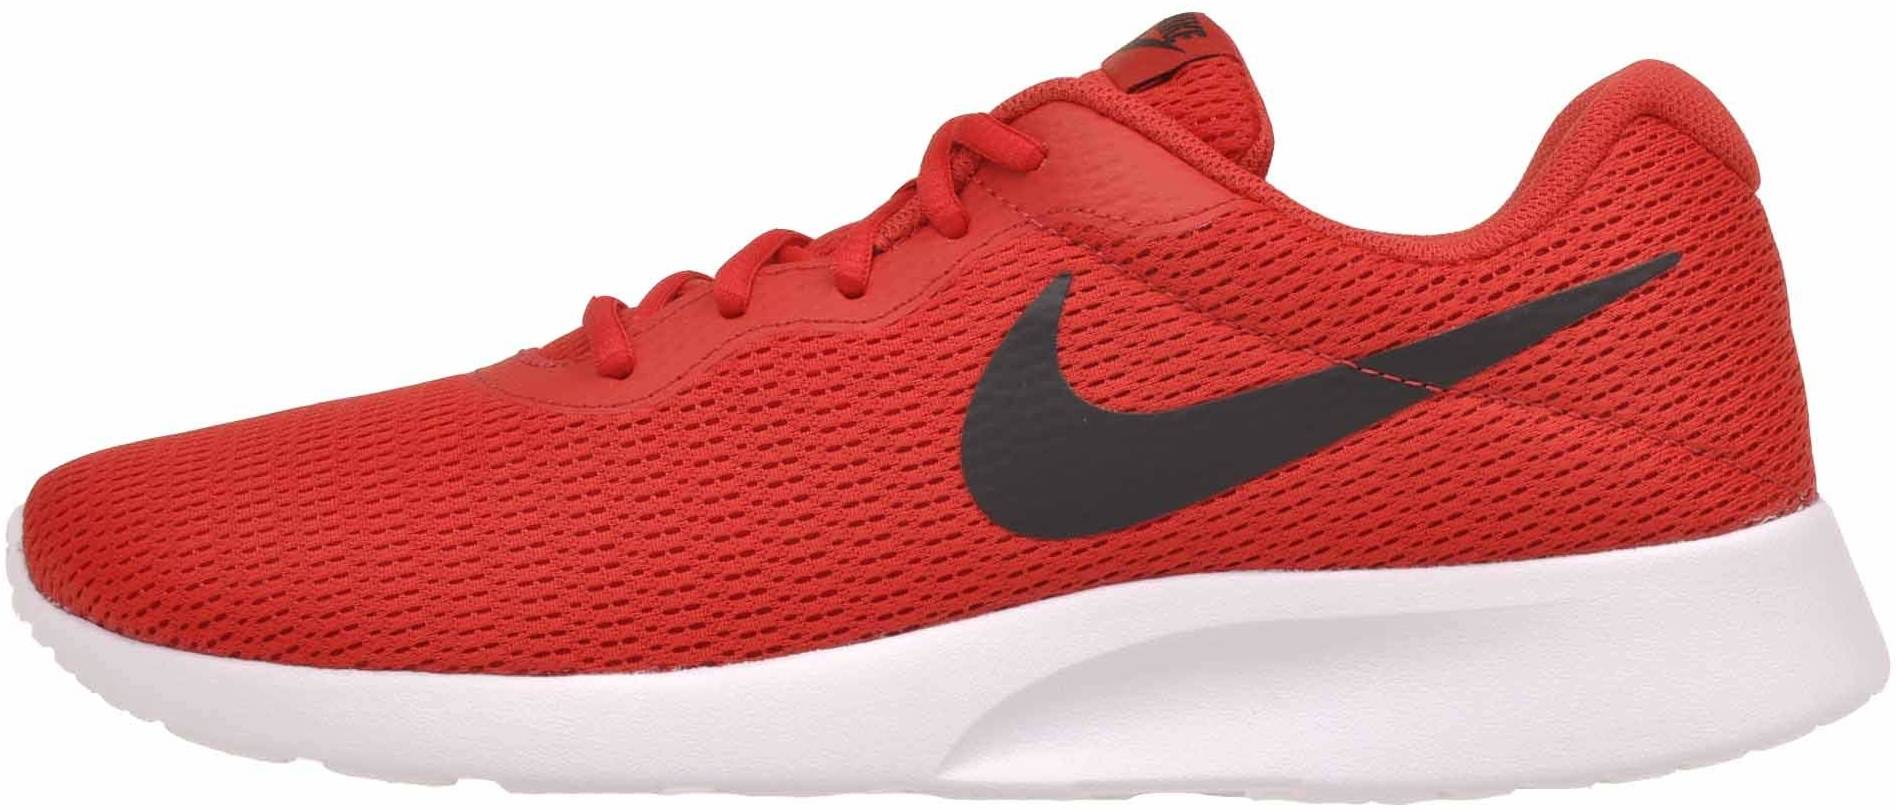 Save 44% on Red Nike Sneakers (90 